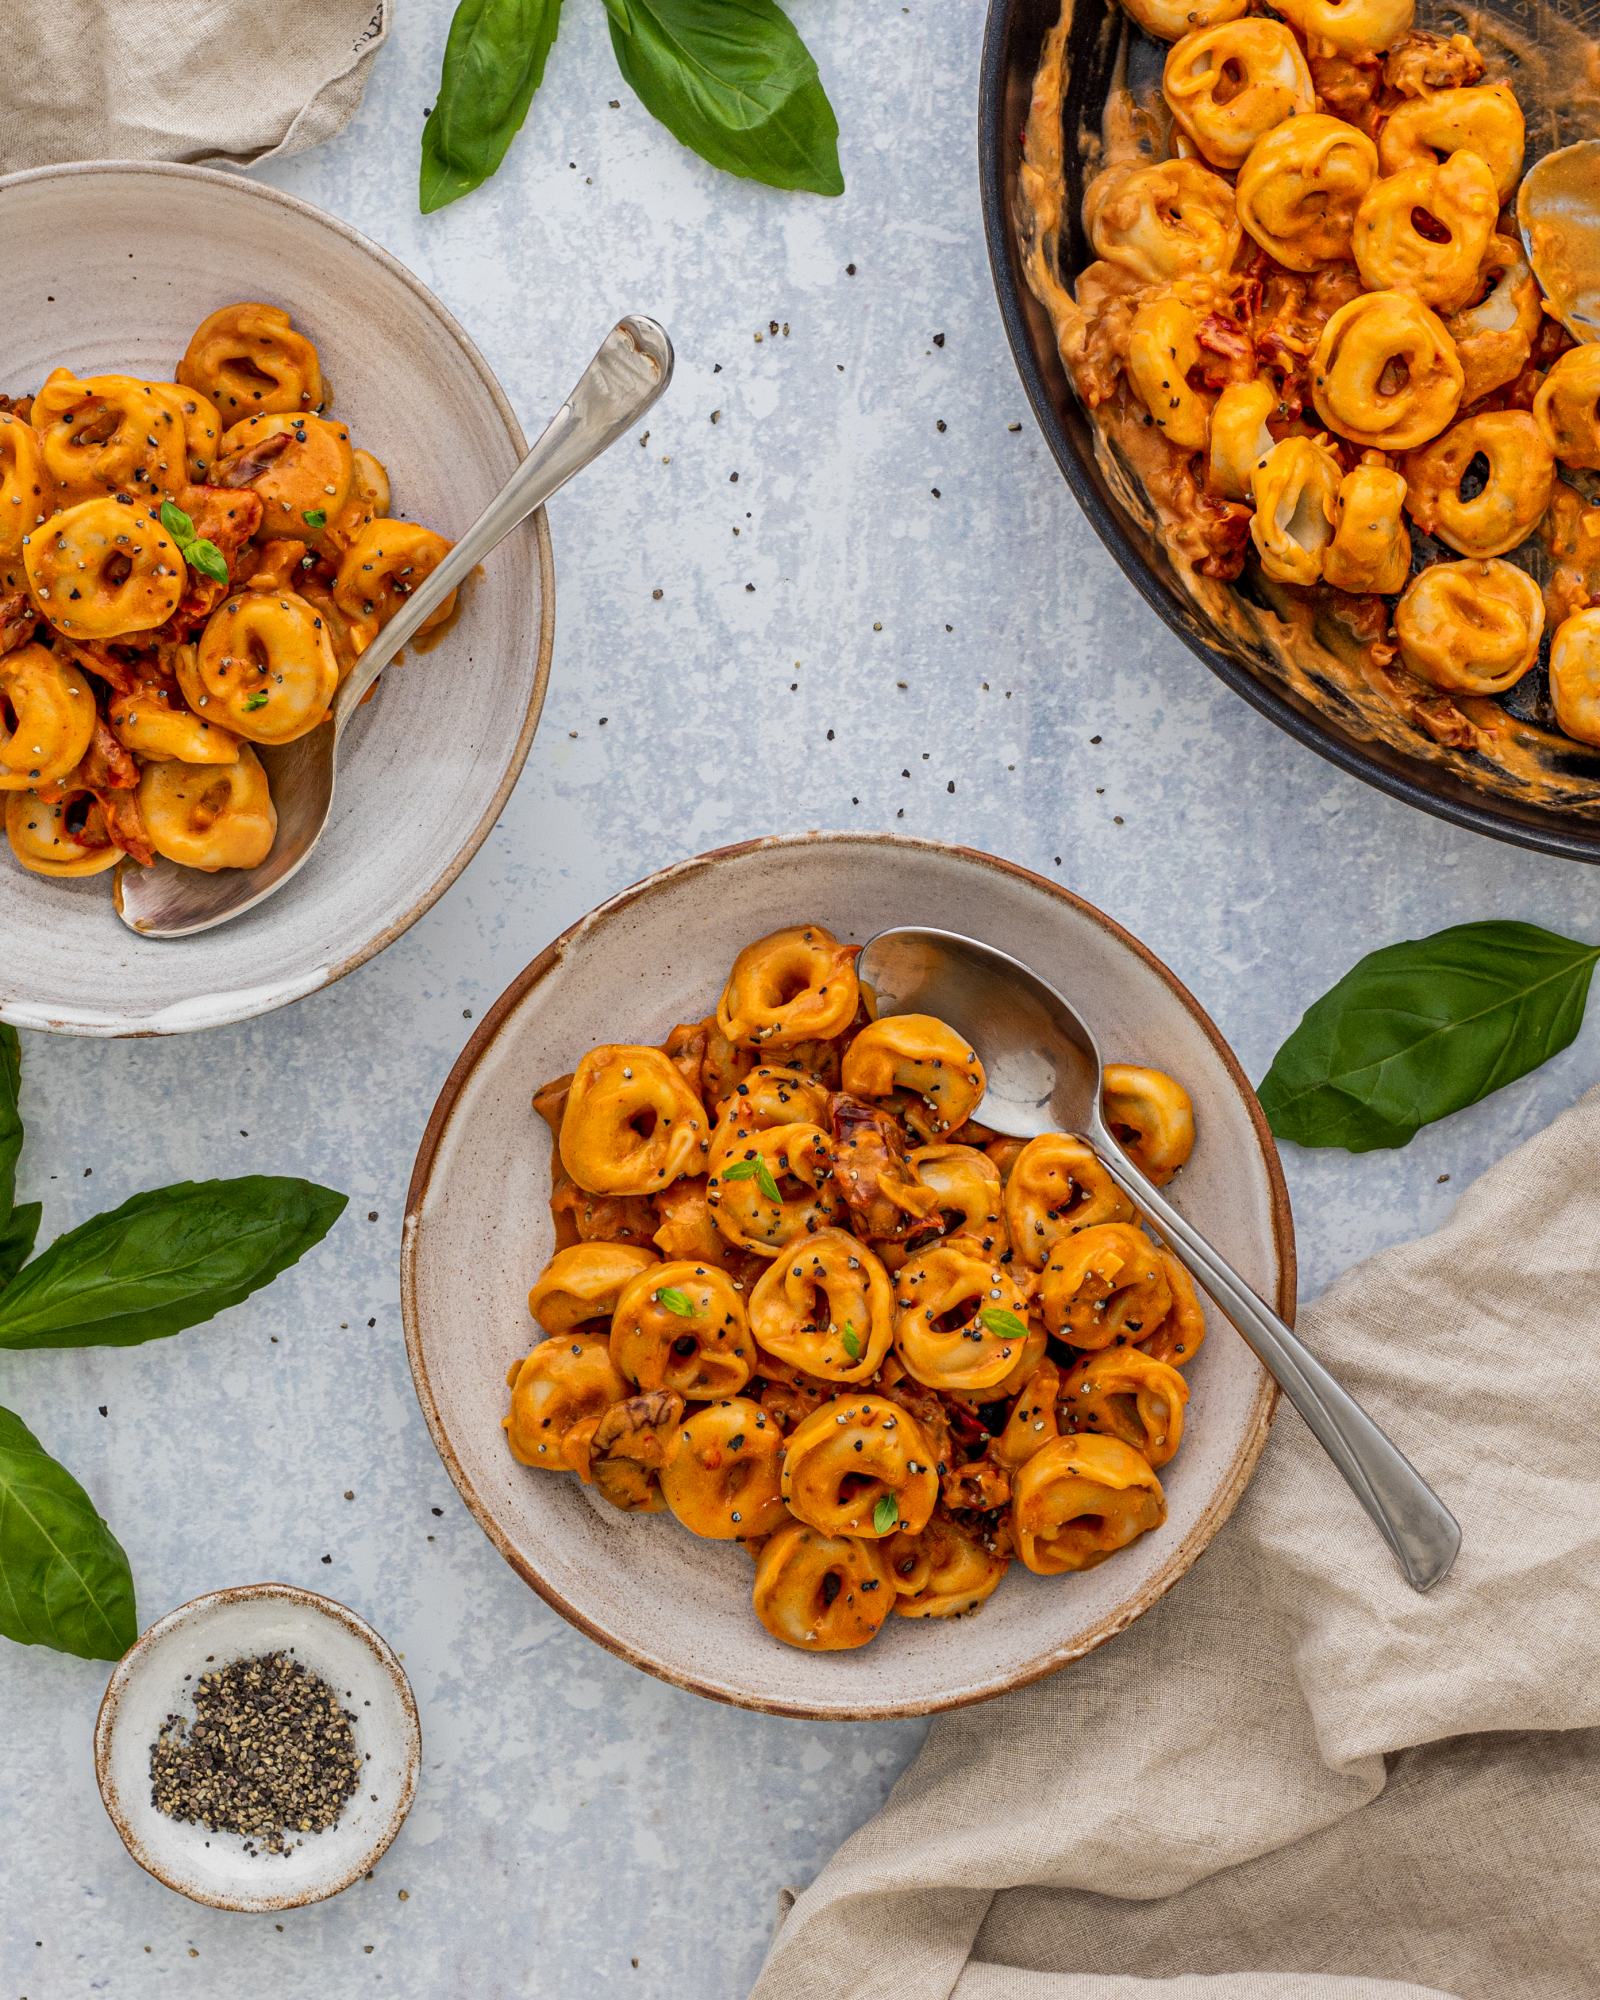 Creamy Sun-Dried Tomato Pasta - Vegan Tortellini served onto 2 plates with the pan standing next to it on a bright table top